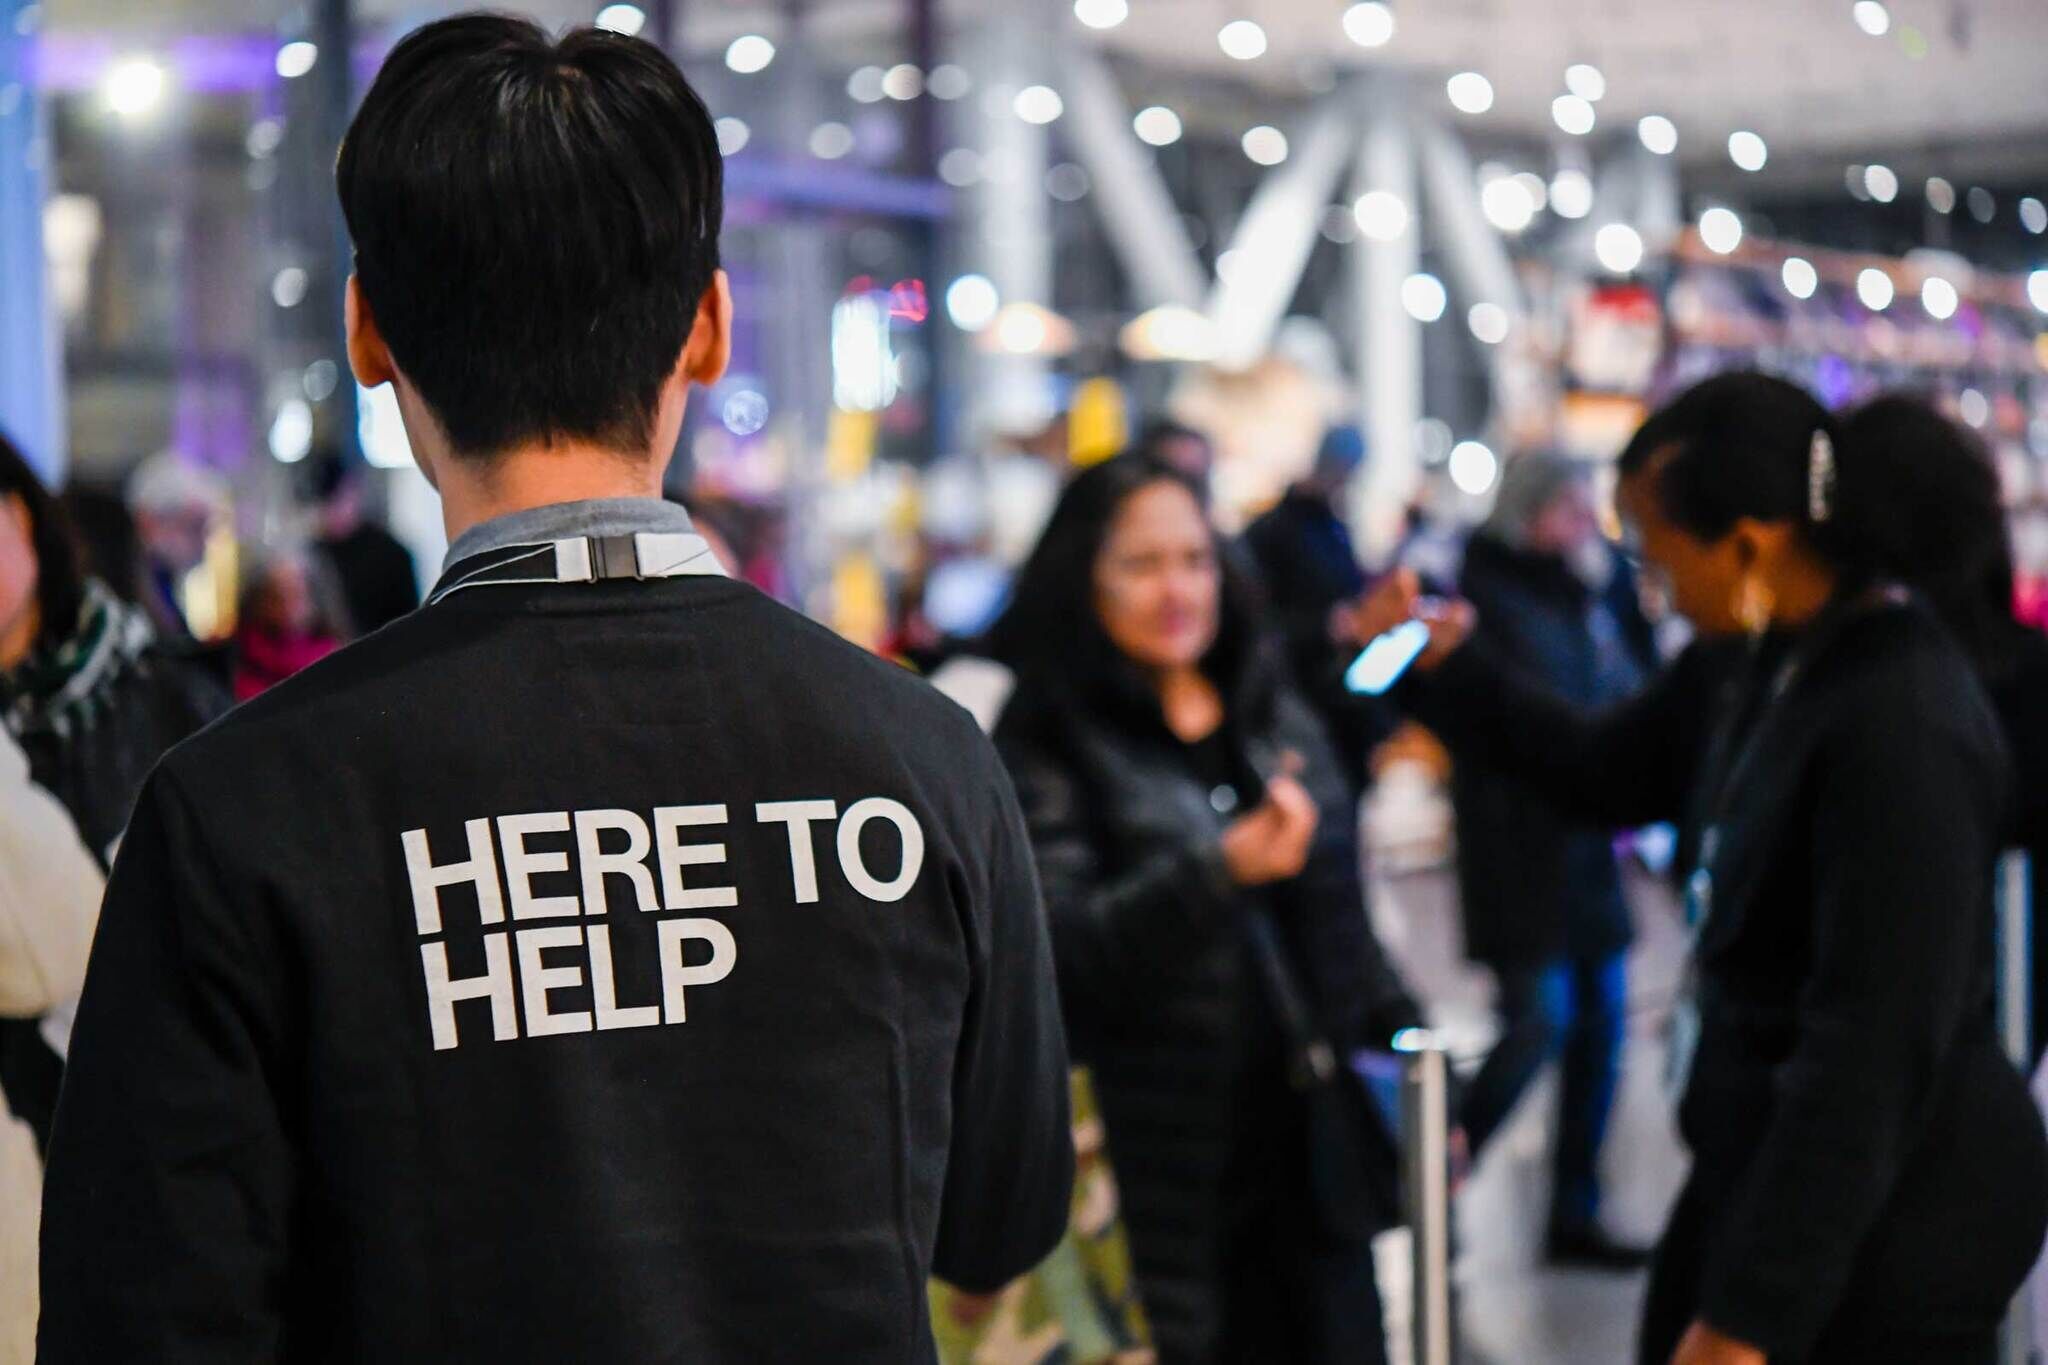 Staff member with "HERE TO HELP" on back of jacket facing a blurred crowd in a busy indoor setting.